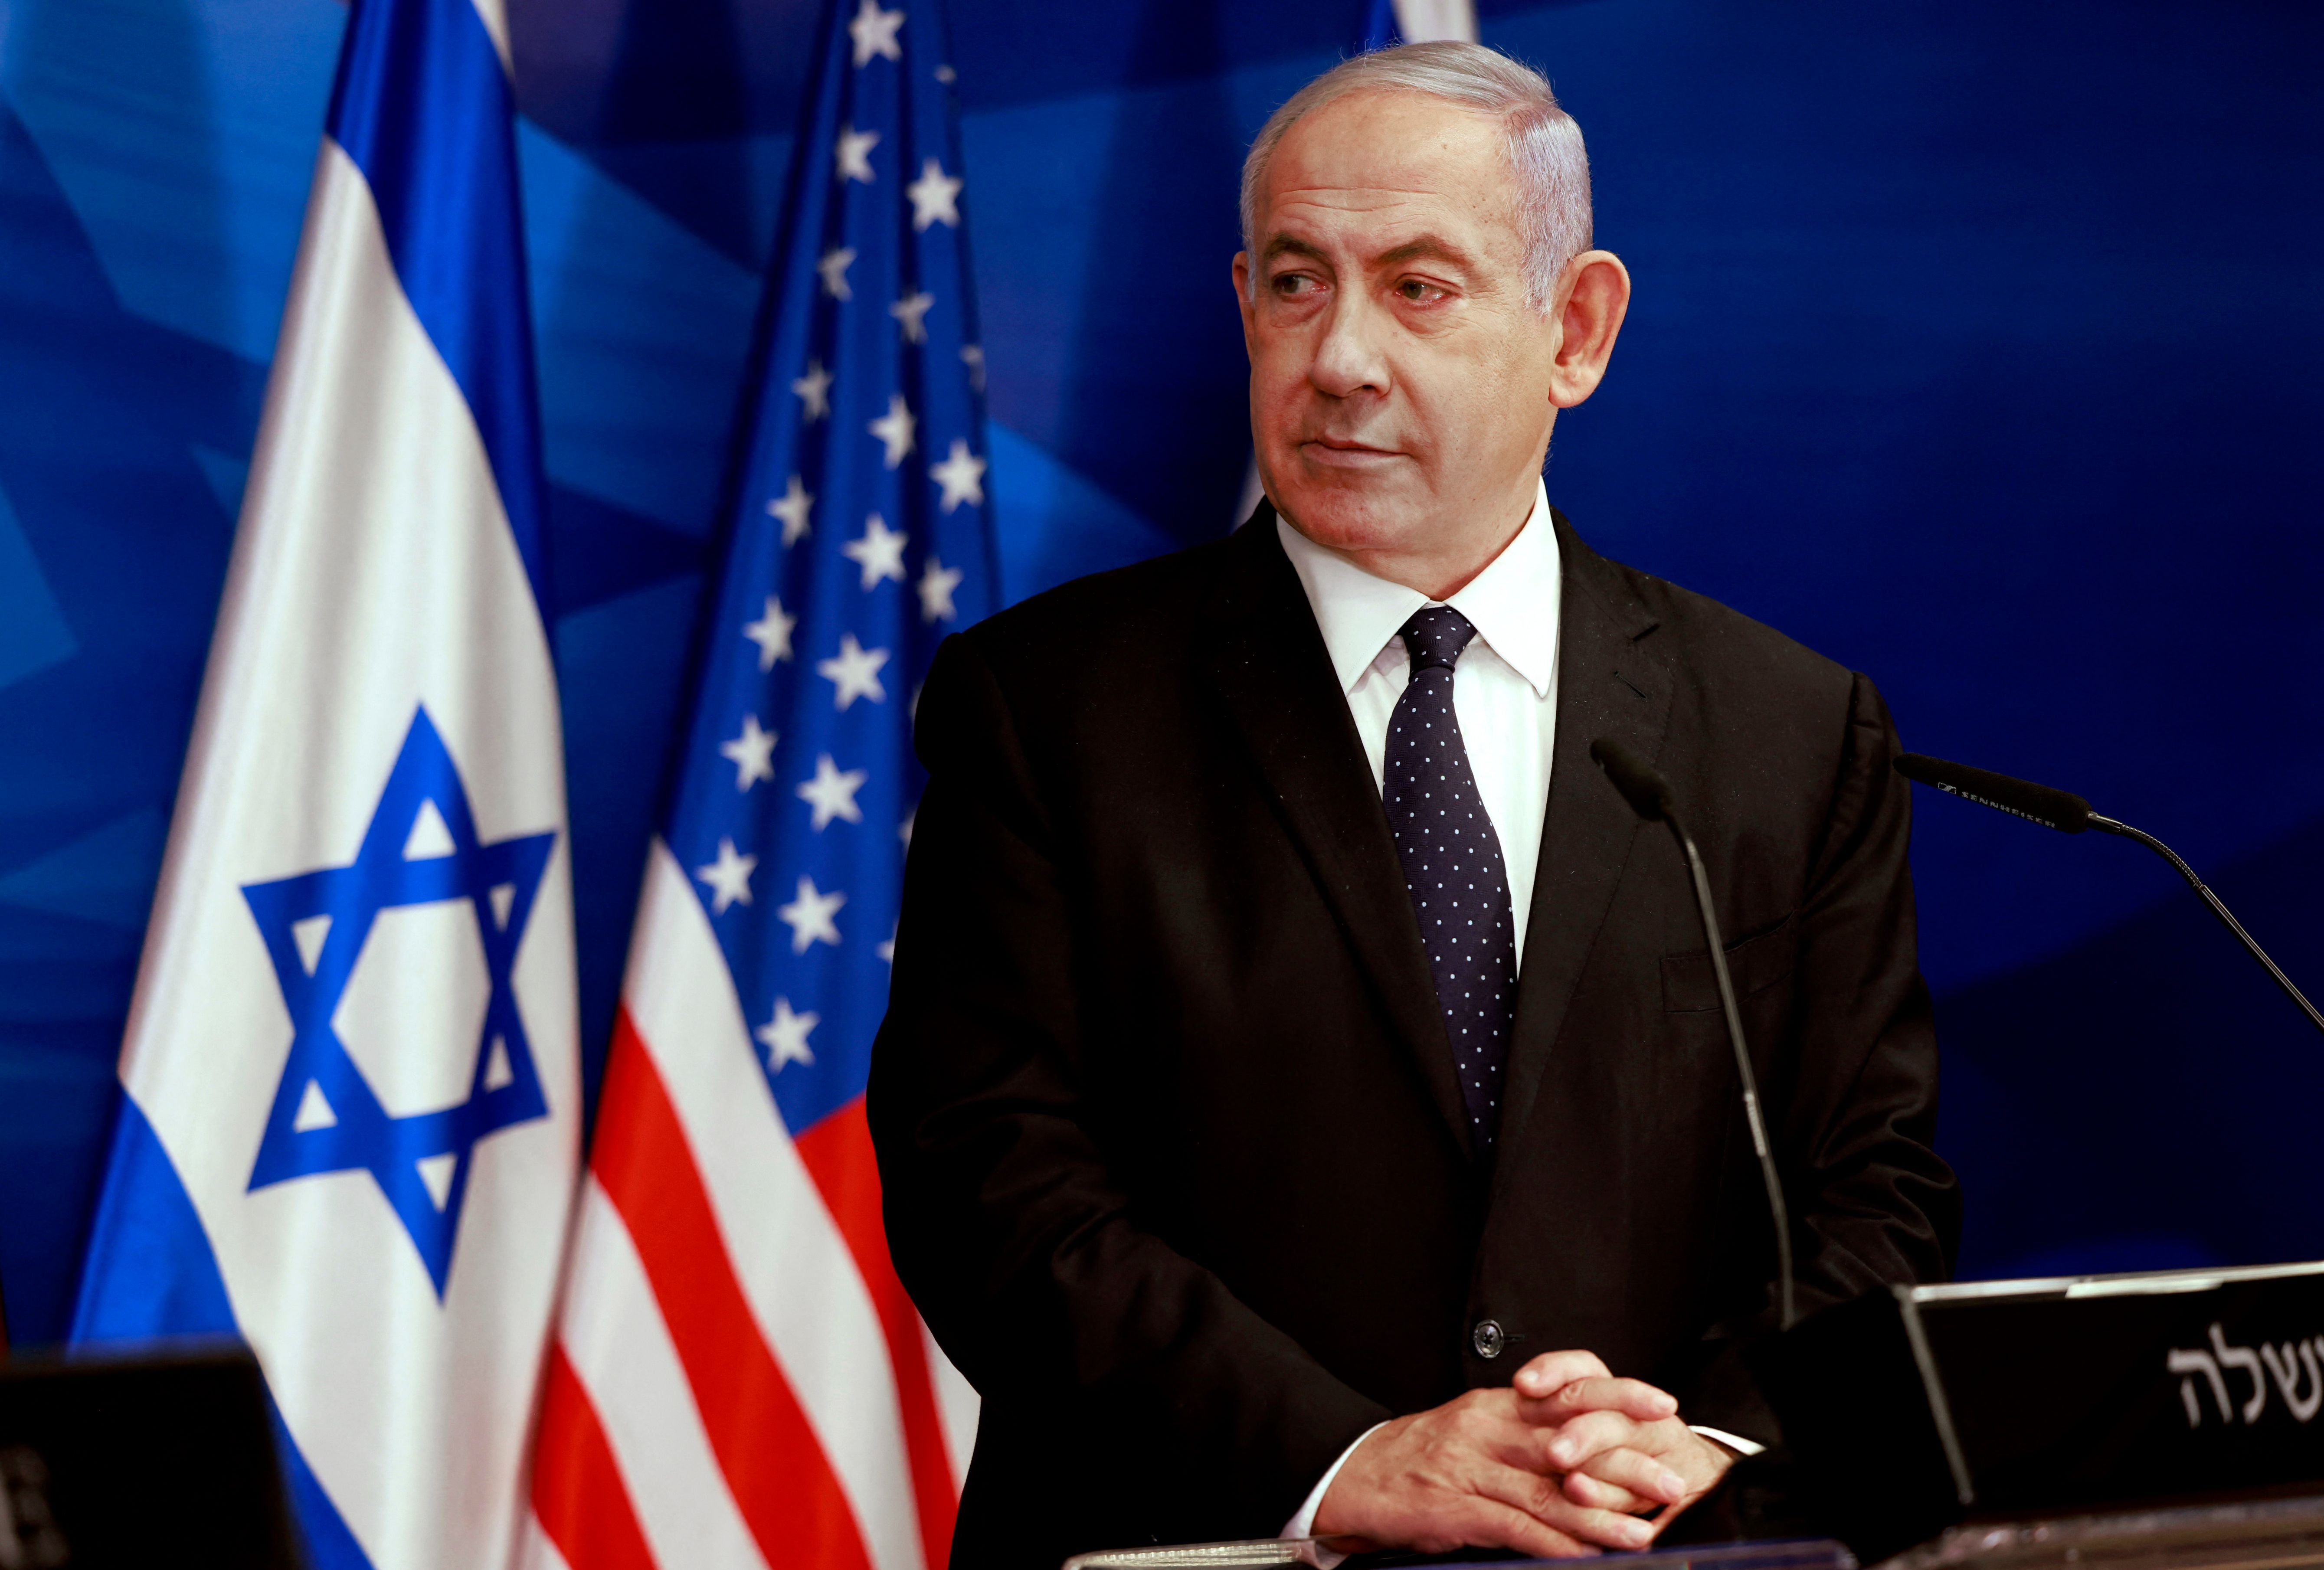 Benjamin Netanyahu watches US Secretary of State Anthony Blinken during a joint press conference in Jerusalem after an Egypt-brokered truce halted fighting